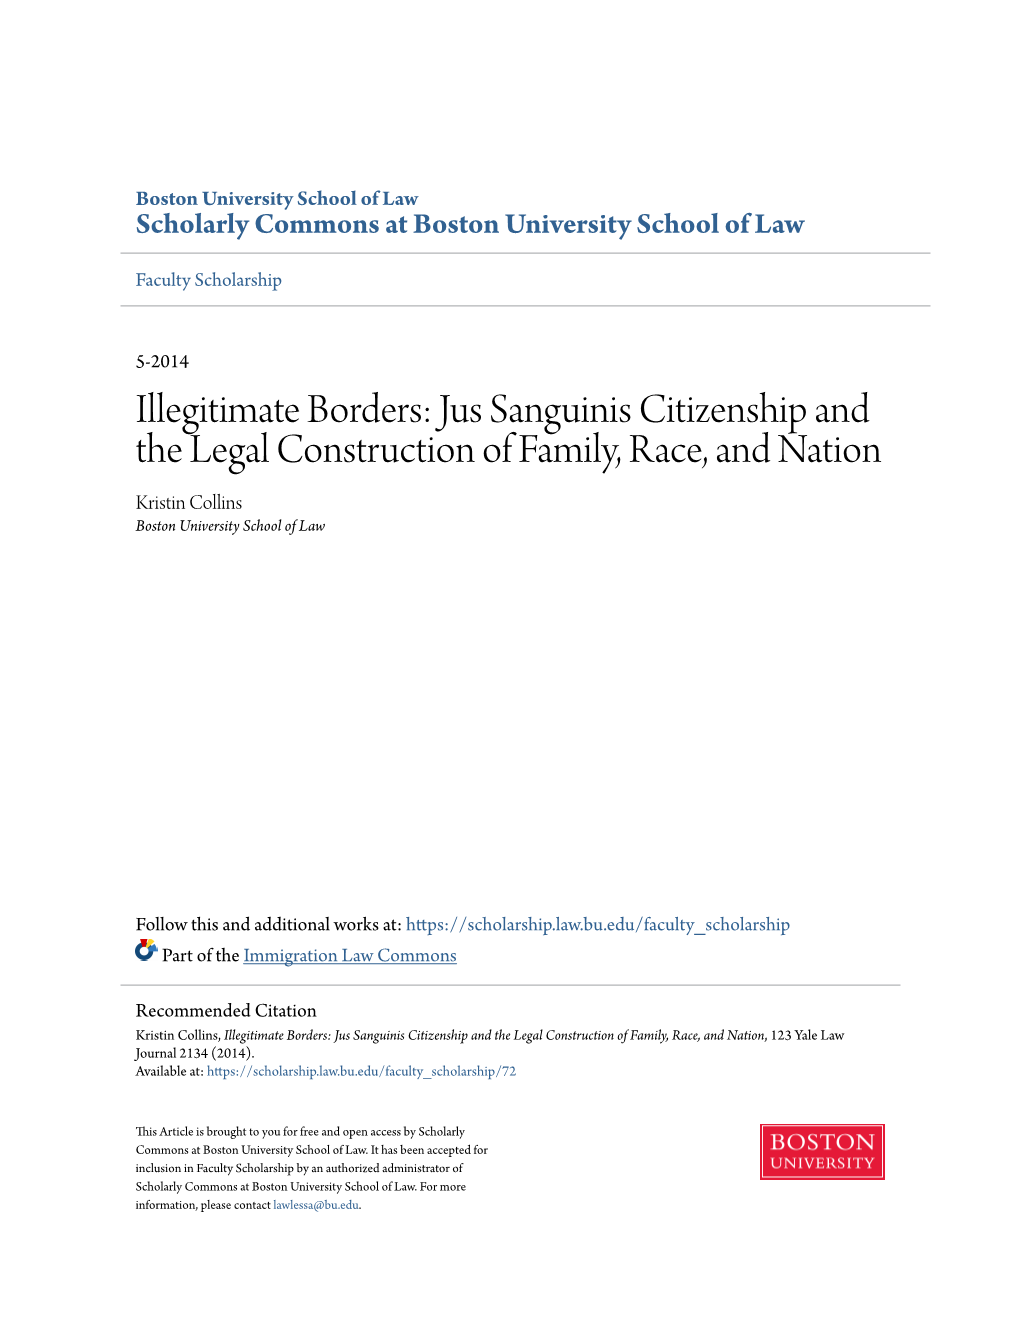 Jus Sanguinis Citizenship and the Legal Construction of Family, Race, and Nation Kristin Collins Boston University School of Law